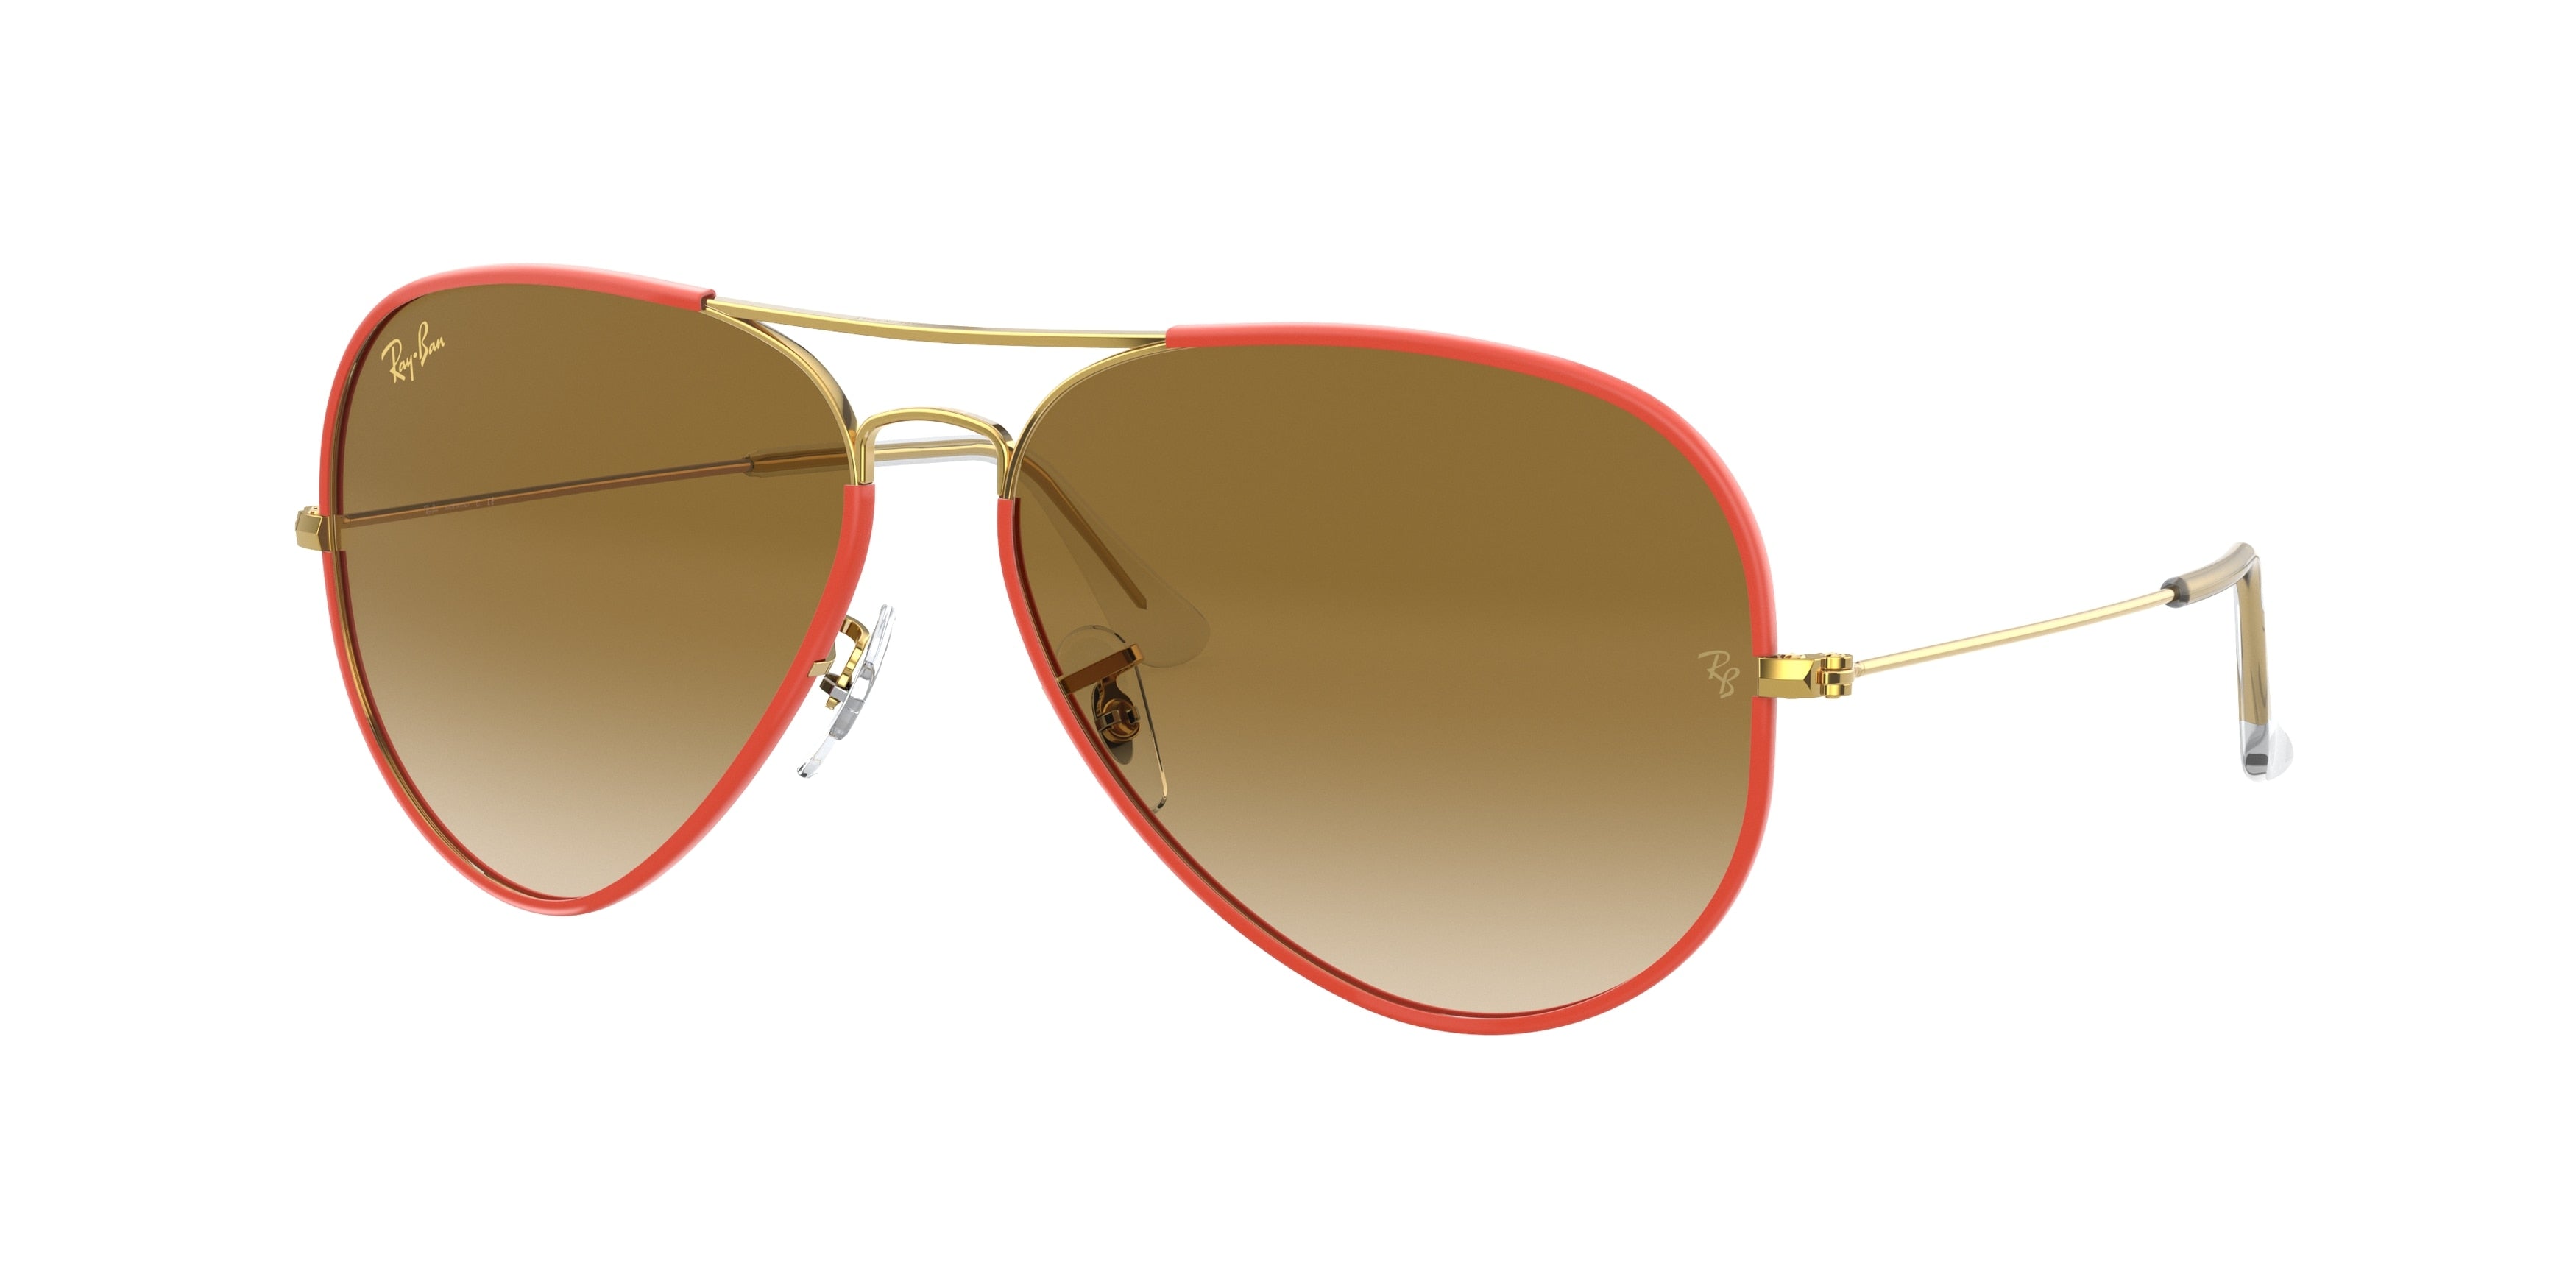 Ray-Ban AVIATOR FULL COLOR RB3025JM Pilot Sunglasses  919651-Red 61-140-14 - Color Map Red